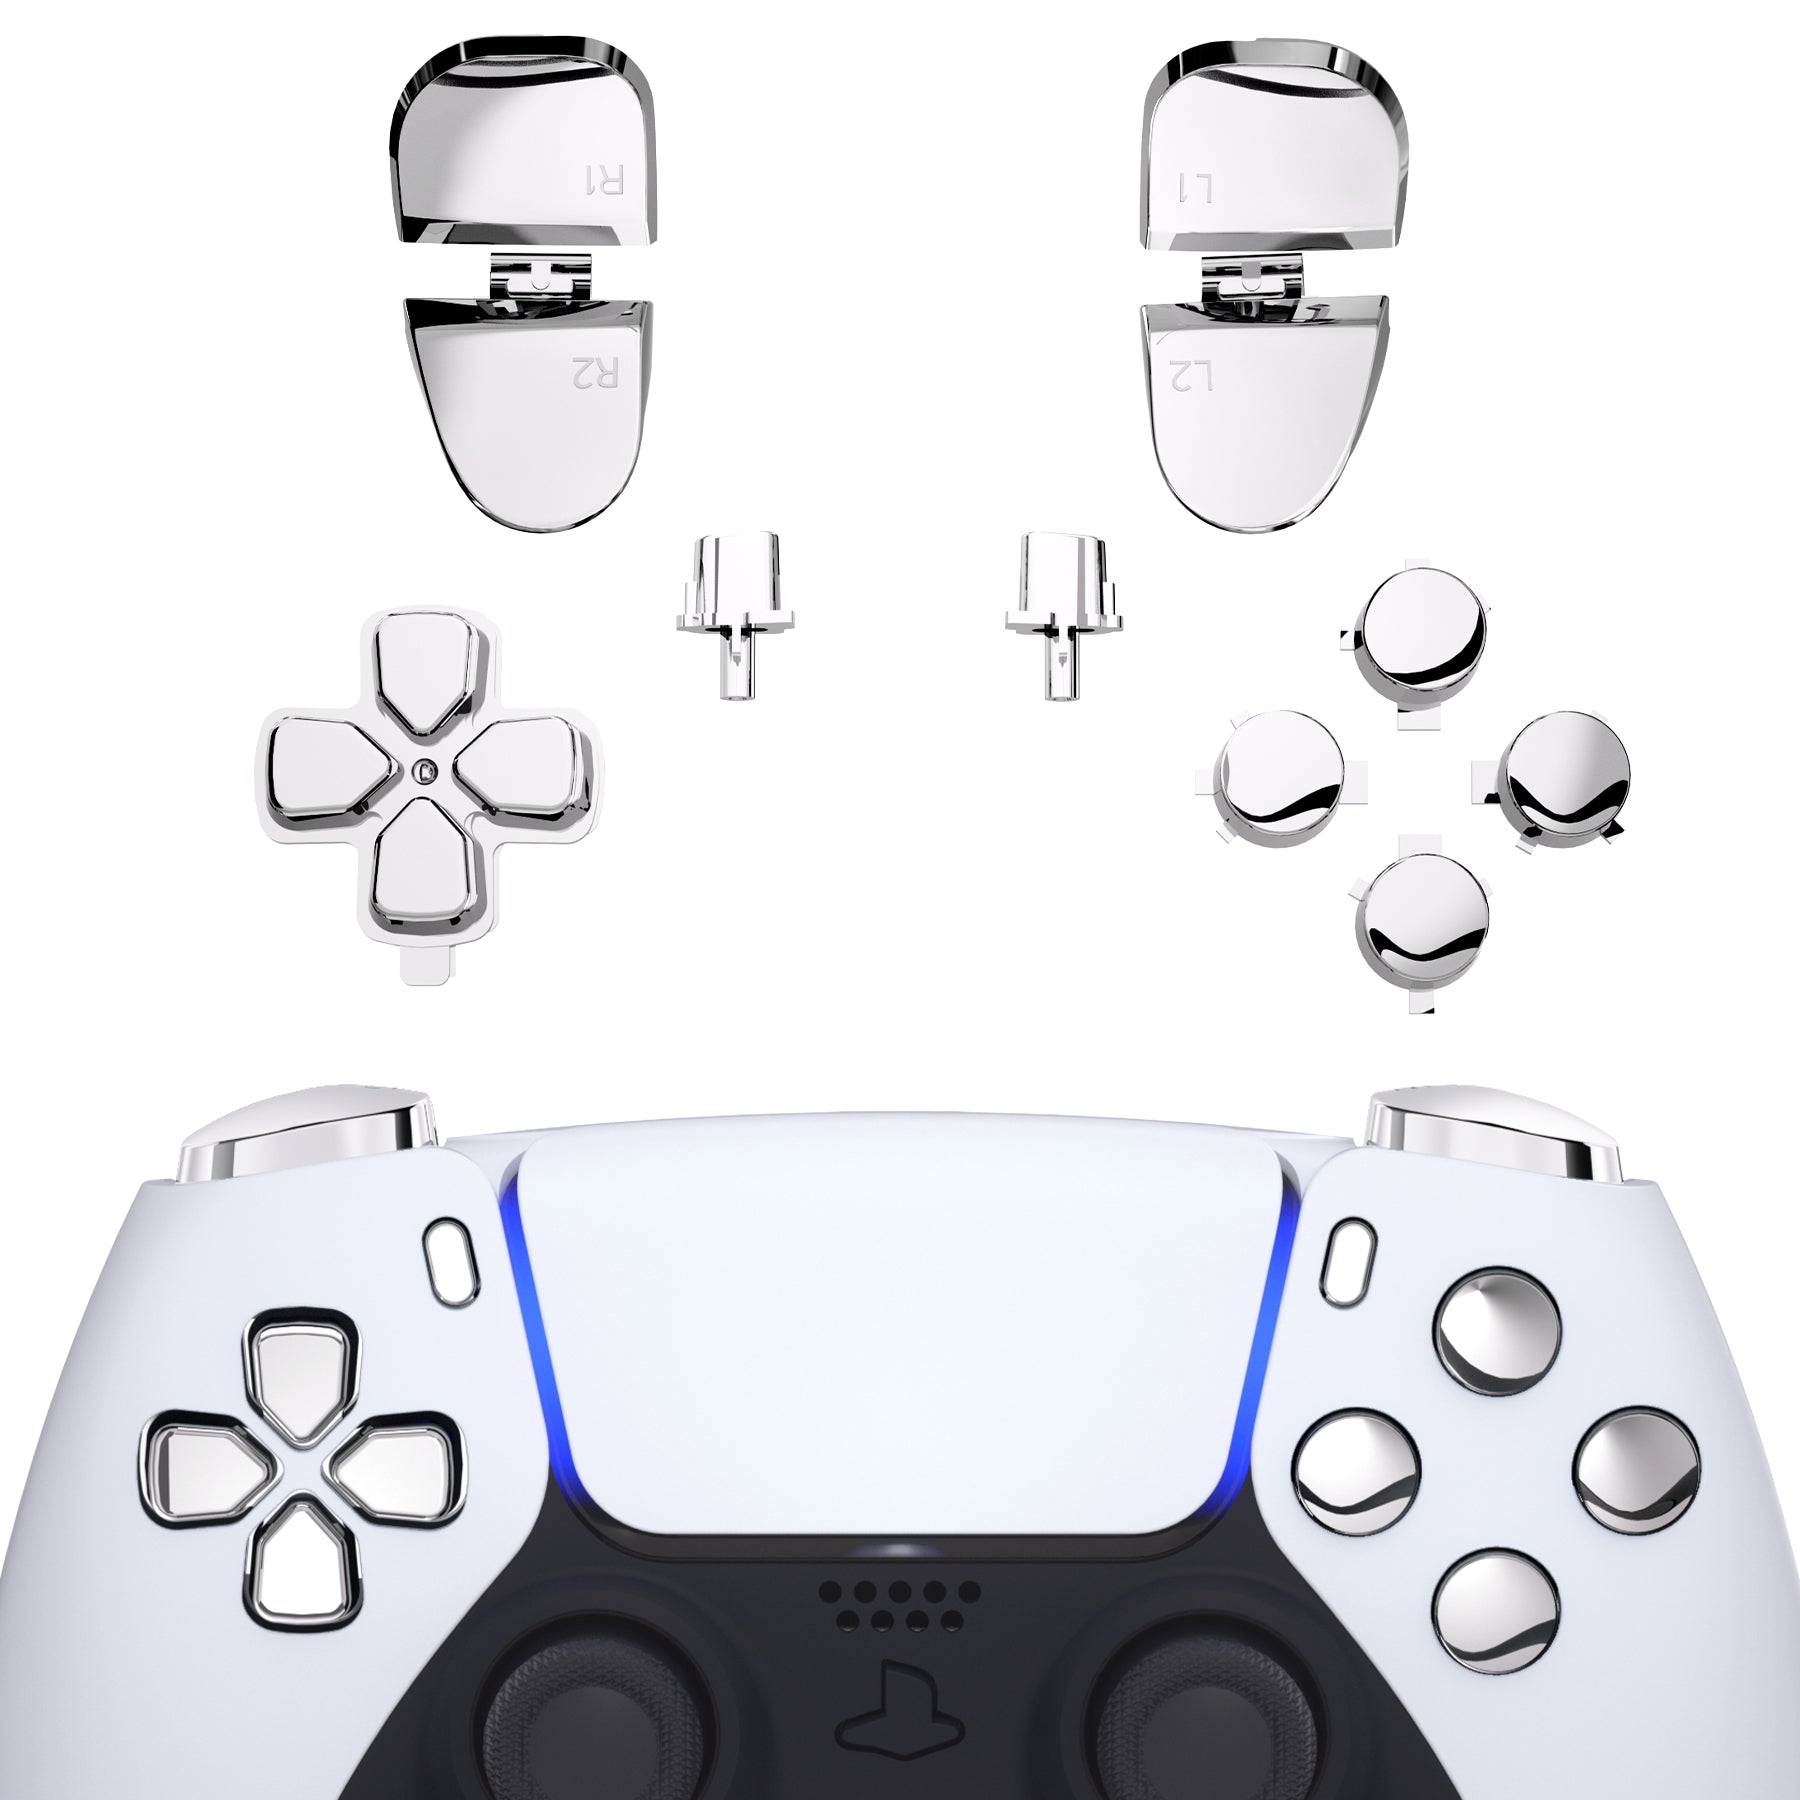 eXtremeRate Retail Replacement D-pad R1 L1 R2 L2 Triggers Share Options Face Buttons, Chrome Silver Full Set Buttons Compatible with ps5 Controller BDM-030 - JPF2002G3